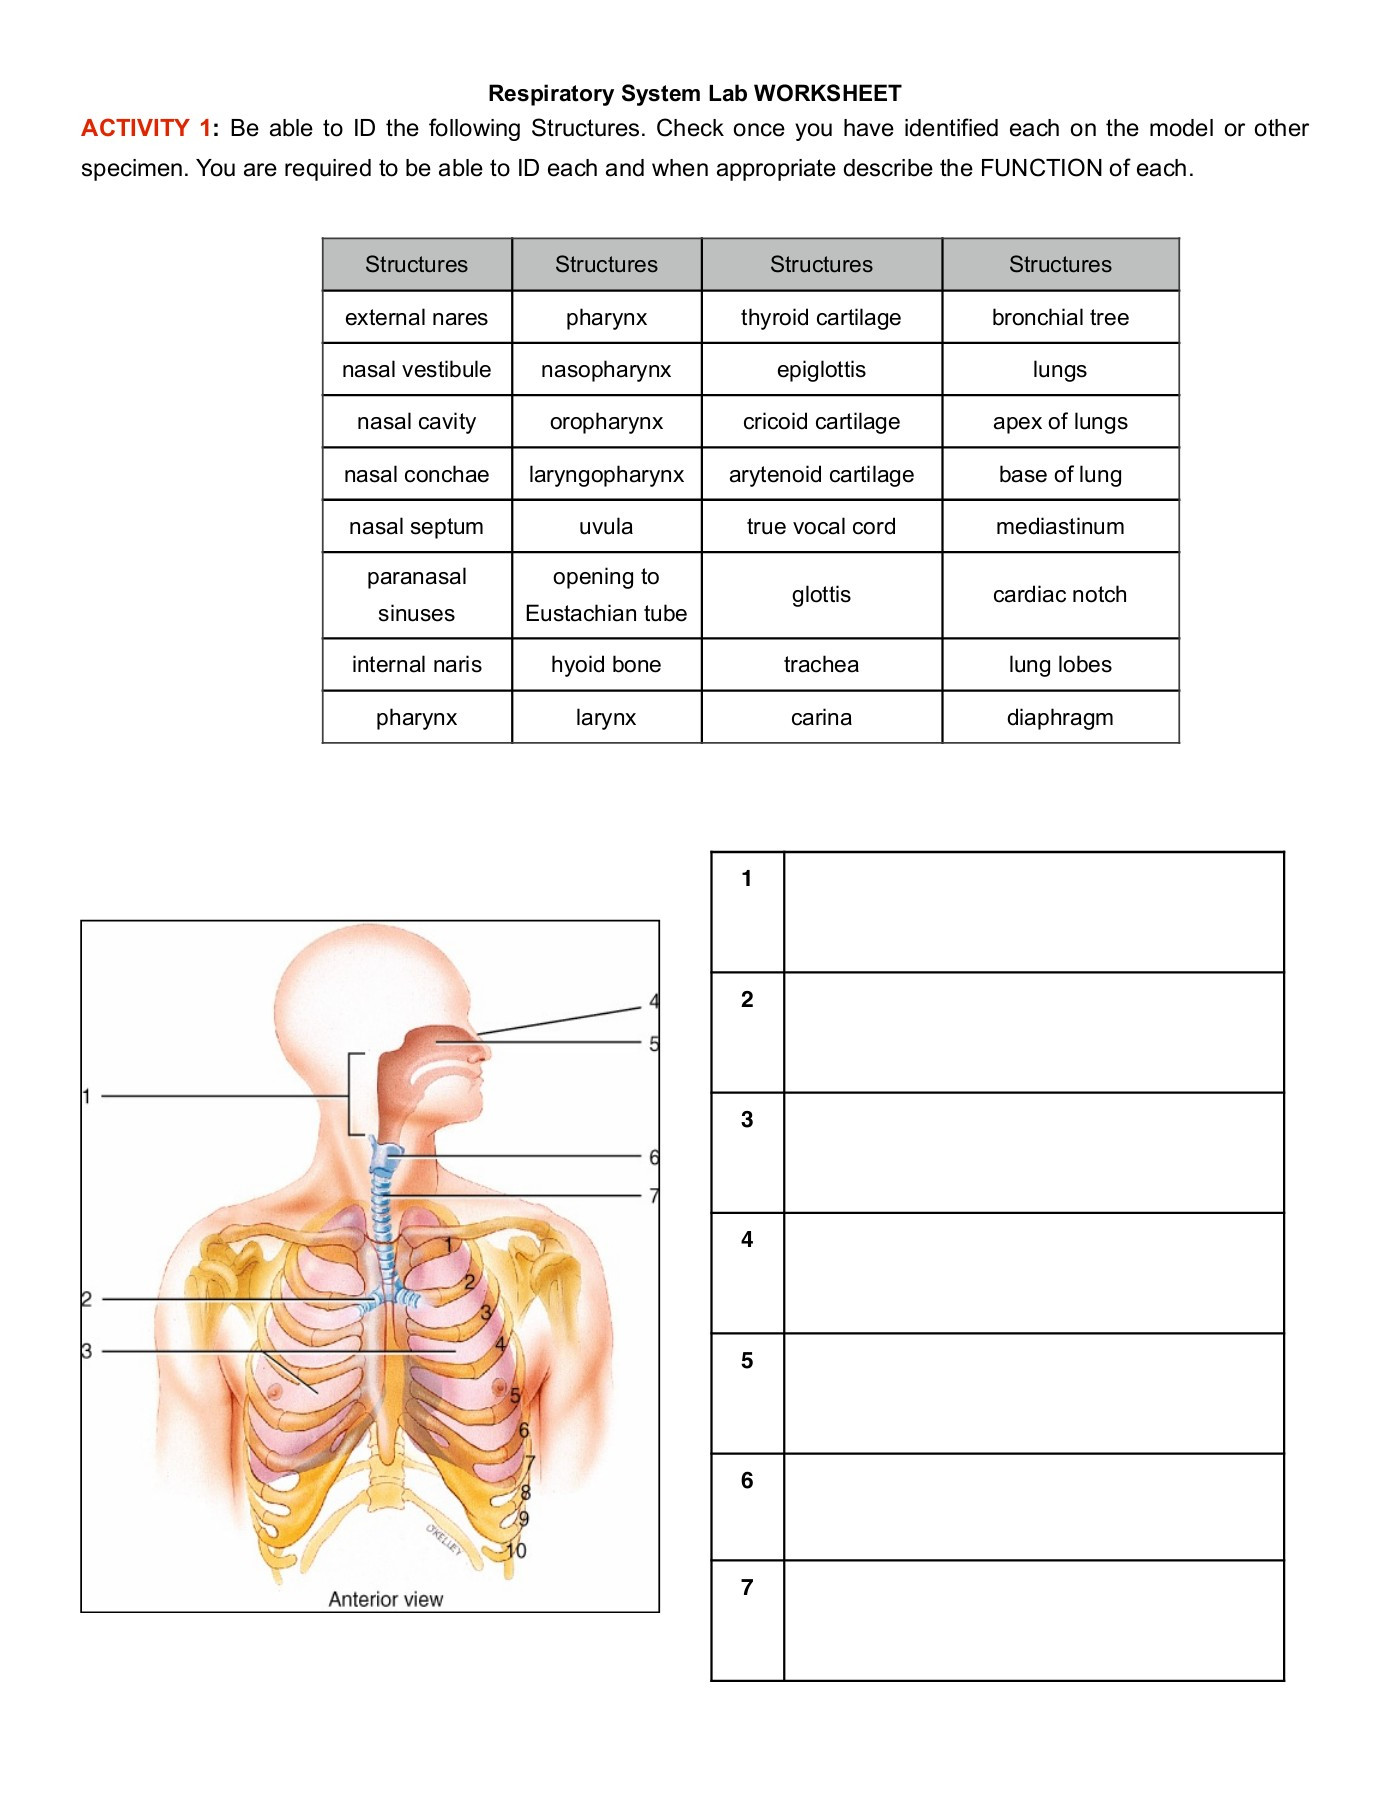 The Respiratory System Worksheet Respiratory System Lab Worksheet Activity 1 Pages 1 10